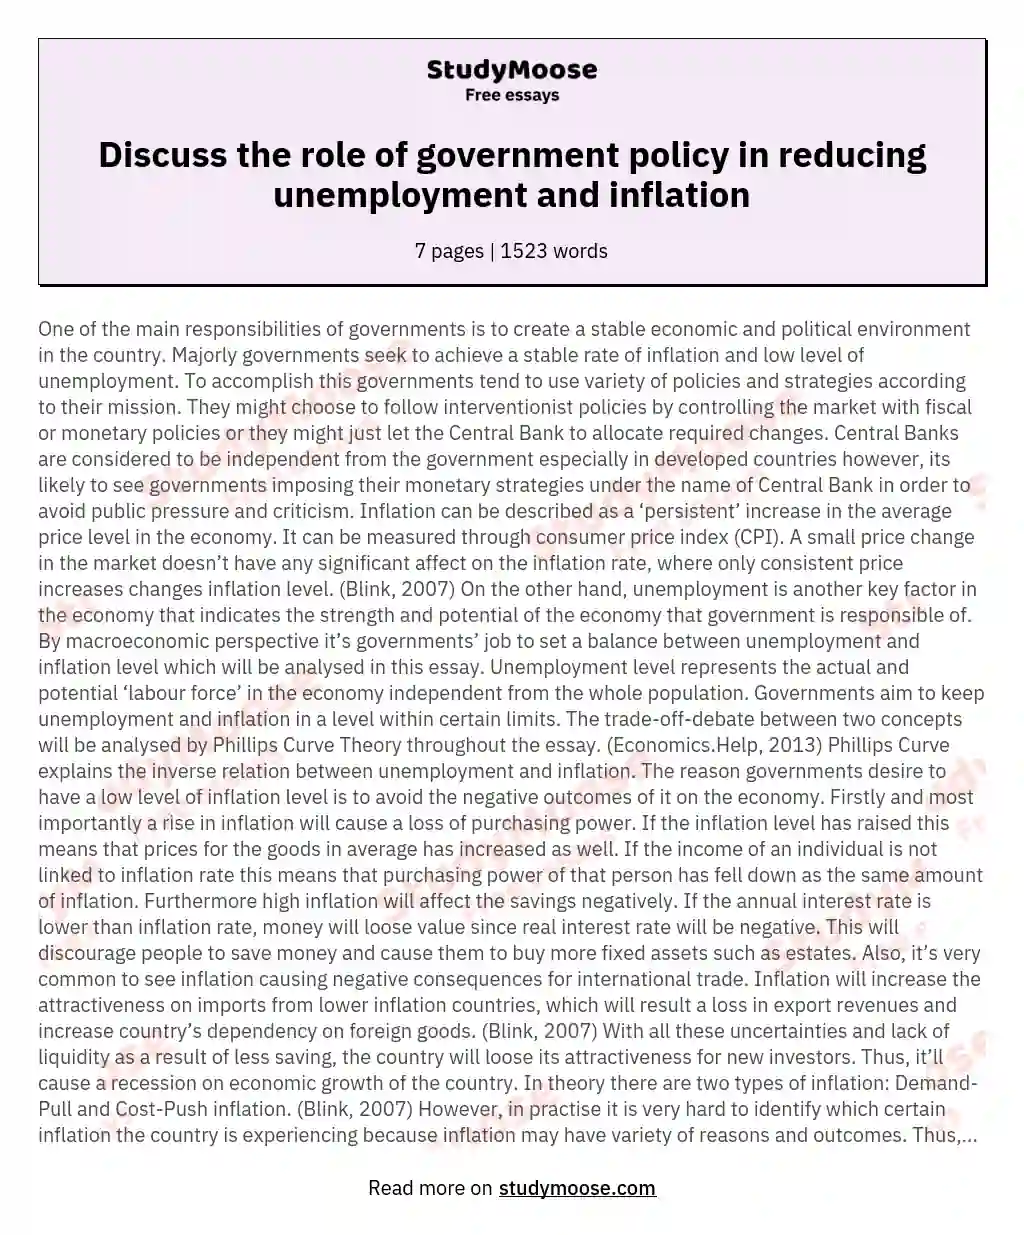 Discuss the role of government policy in reducing unemployment and inflation essay